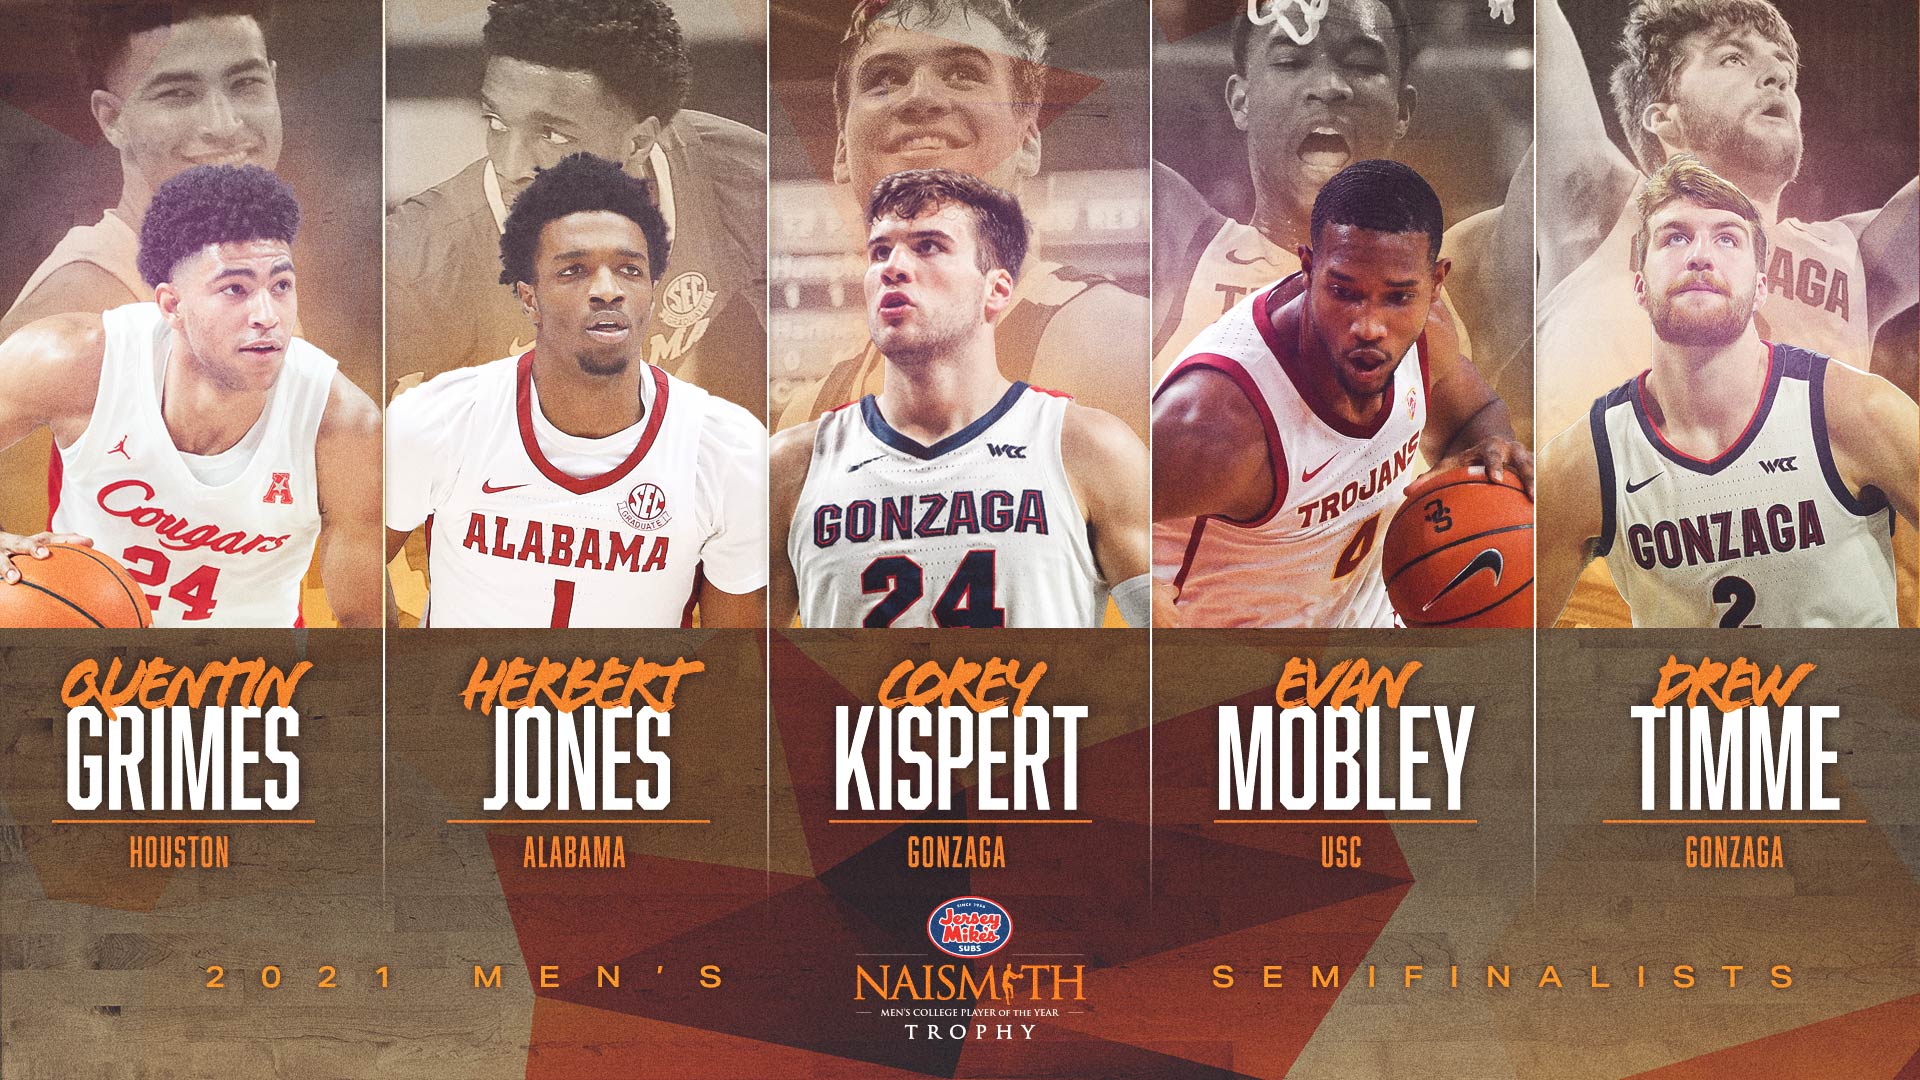 Timme, Kispert named Naismith Trophy semifinalists